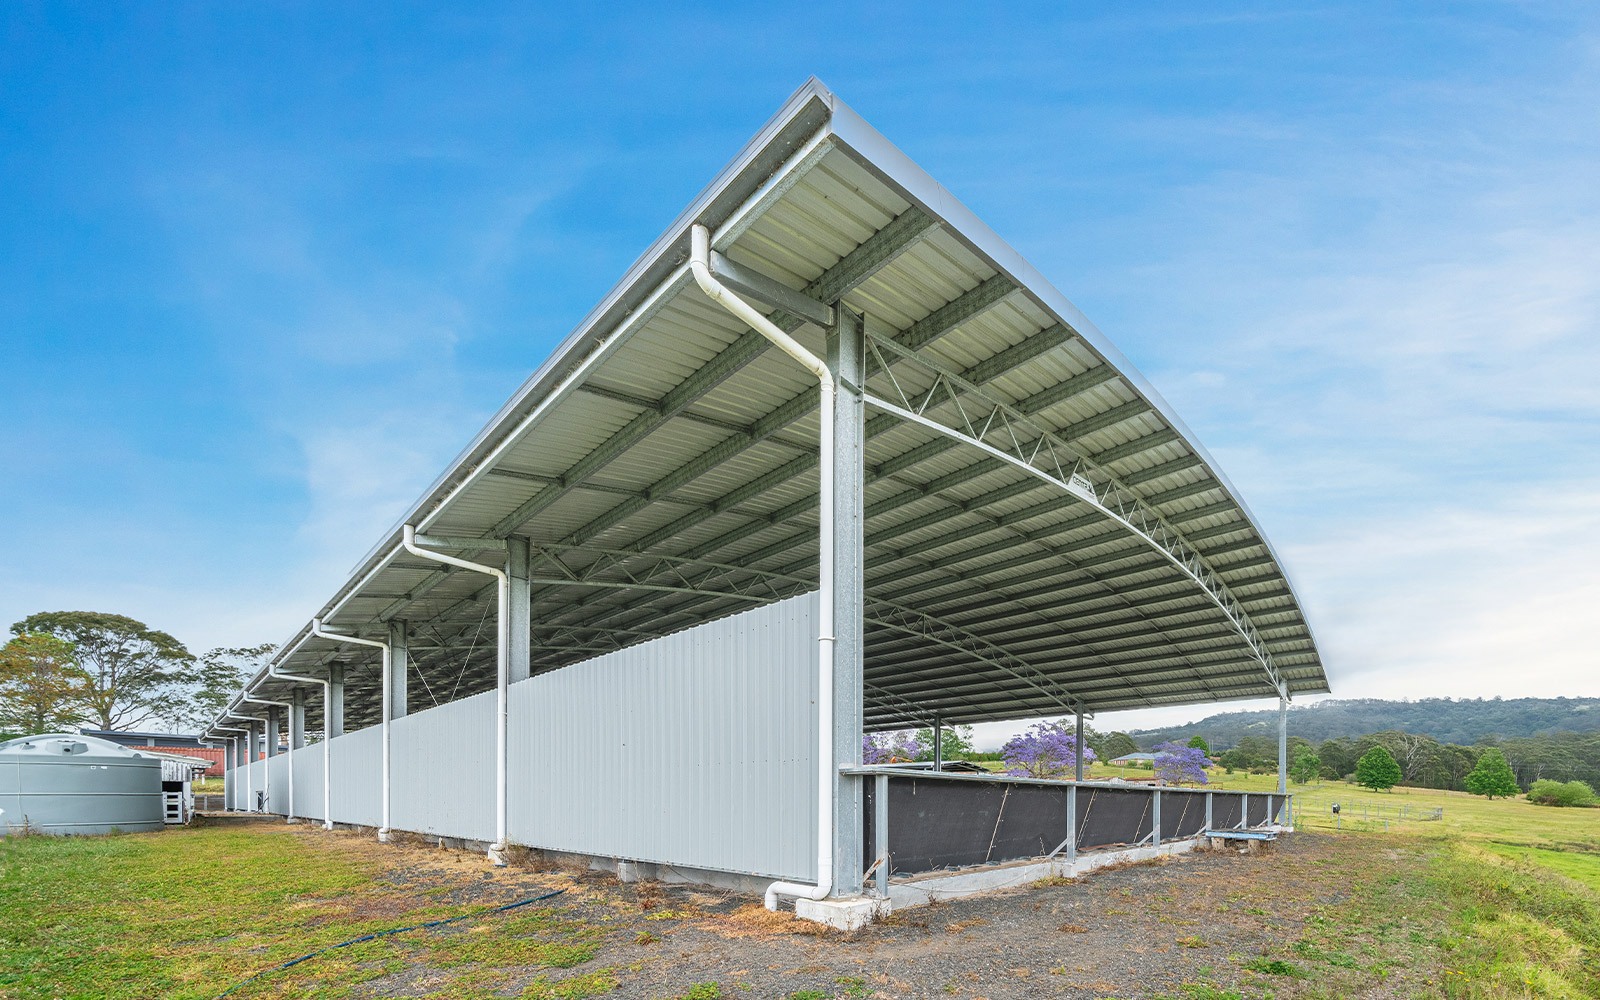 Peter and Pamela Bice roof arena cover shed